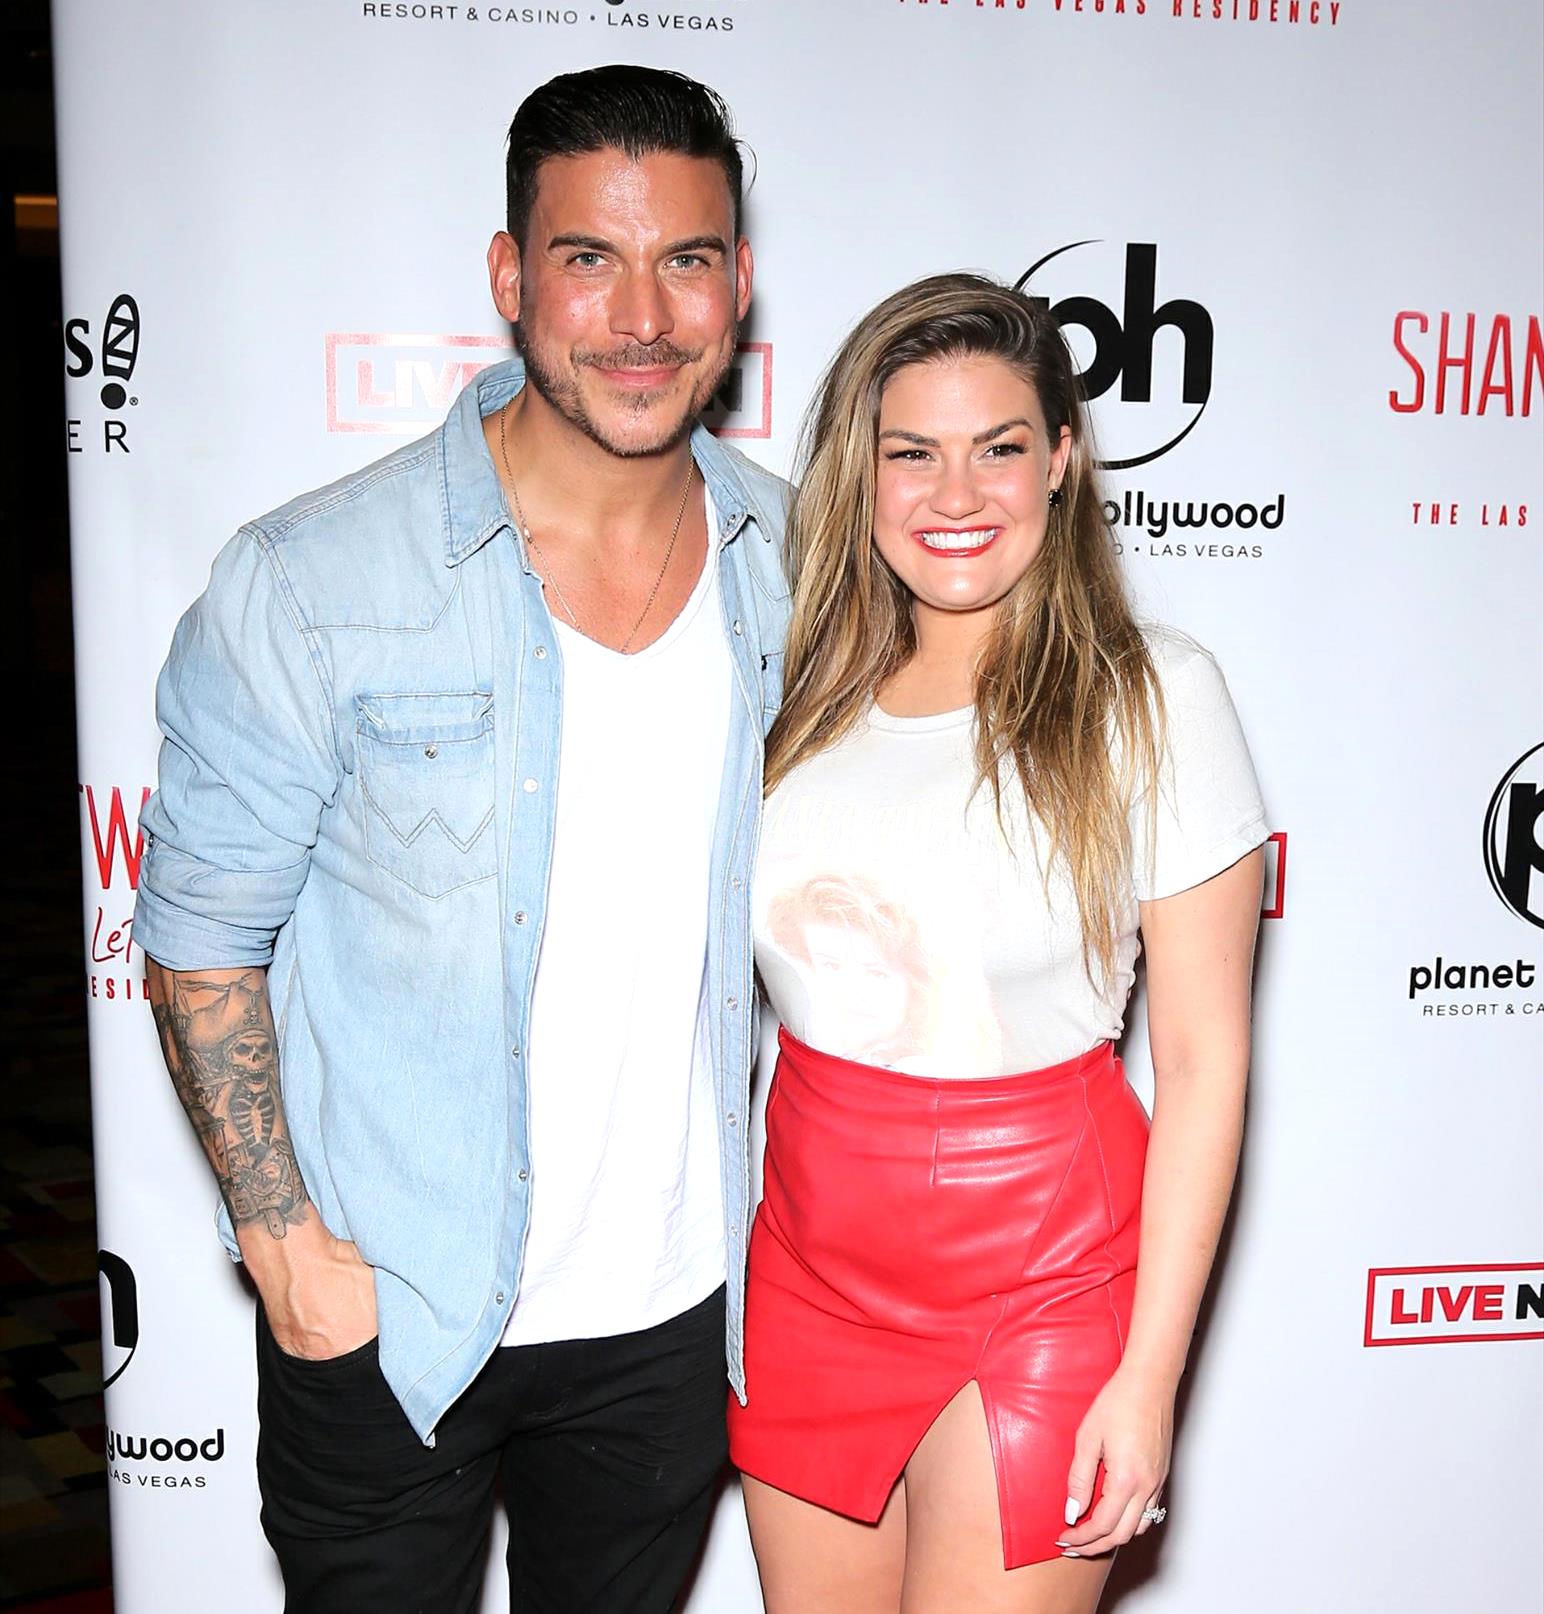 It's Official! Jax Taylor Confirms He is Leaving Vanderpump Rules After 8 Seasons and Teases a Spinoff, Wife Brittany Cartwright Not Returning as Well Plus What Bravo is Saying Amid Rumors of a Firing